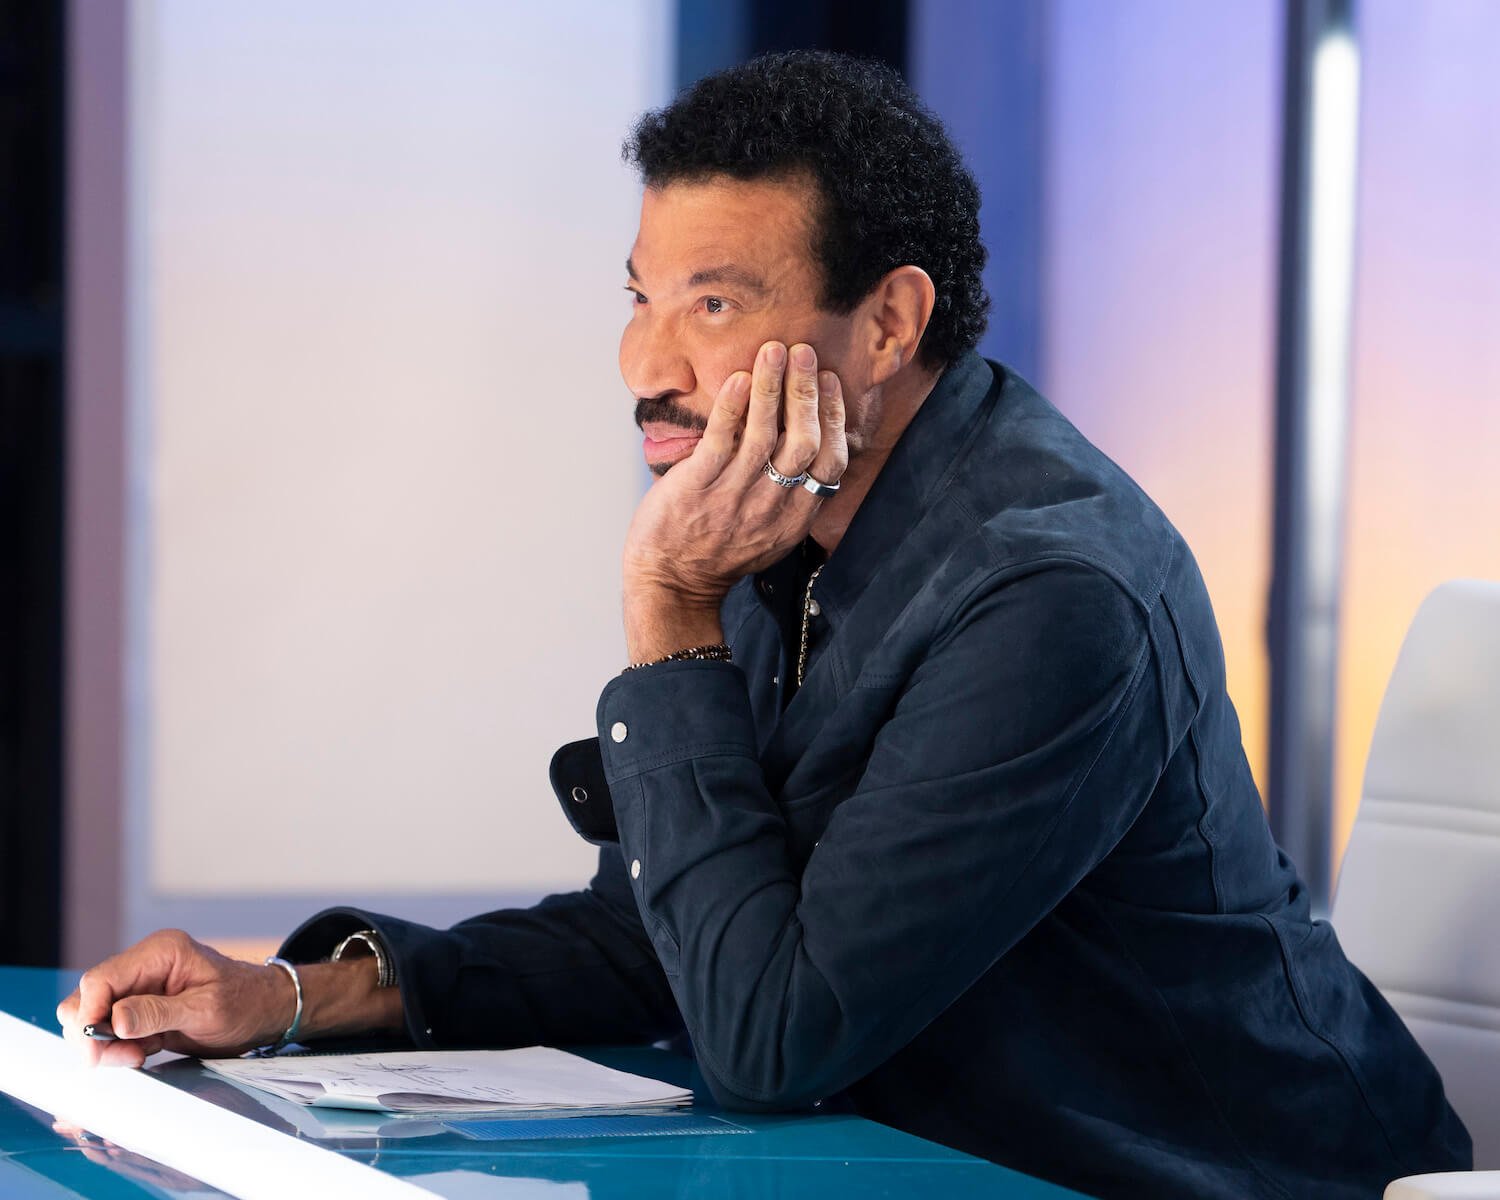 'American Idol' judge Lionel Richie with his head in his hand looking at a contestant out of frame